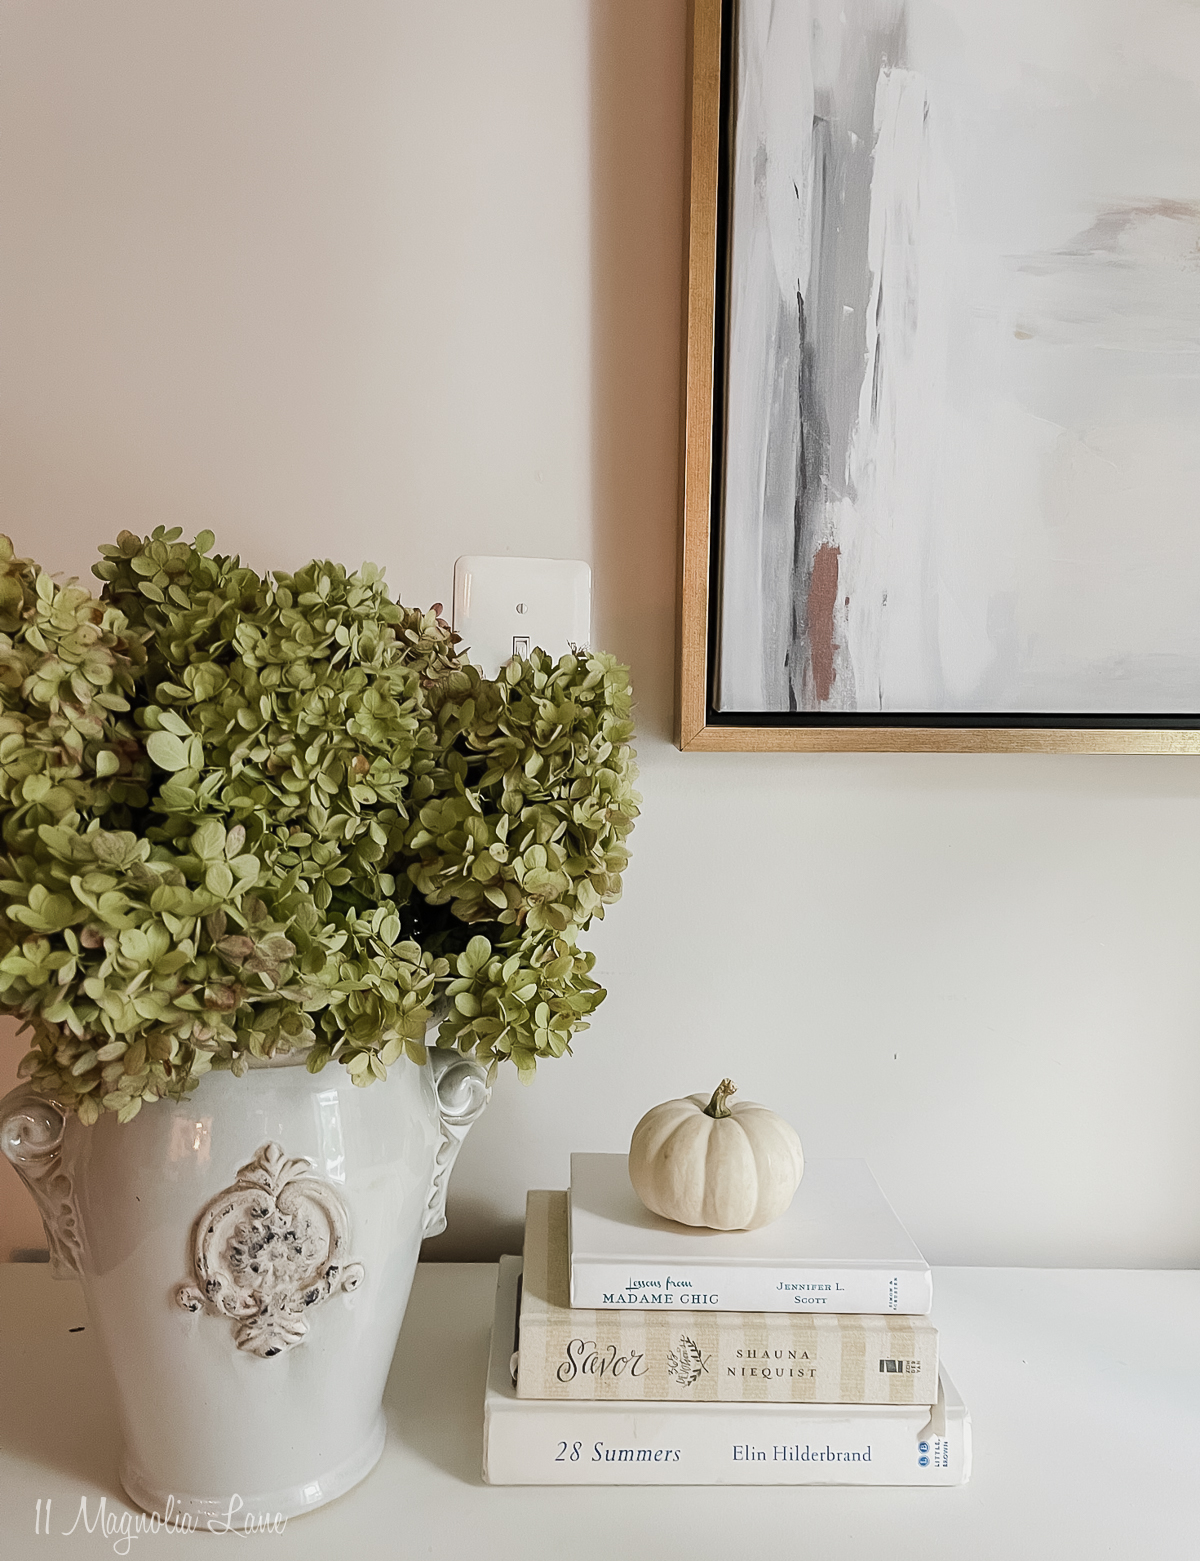 Decorating for Autumn: Our Fall Home Tours